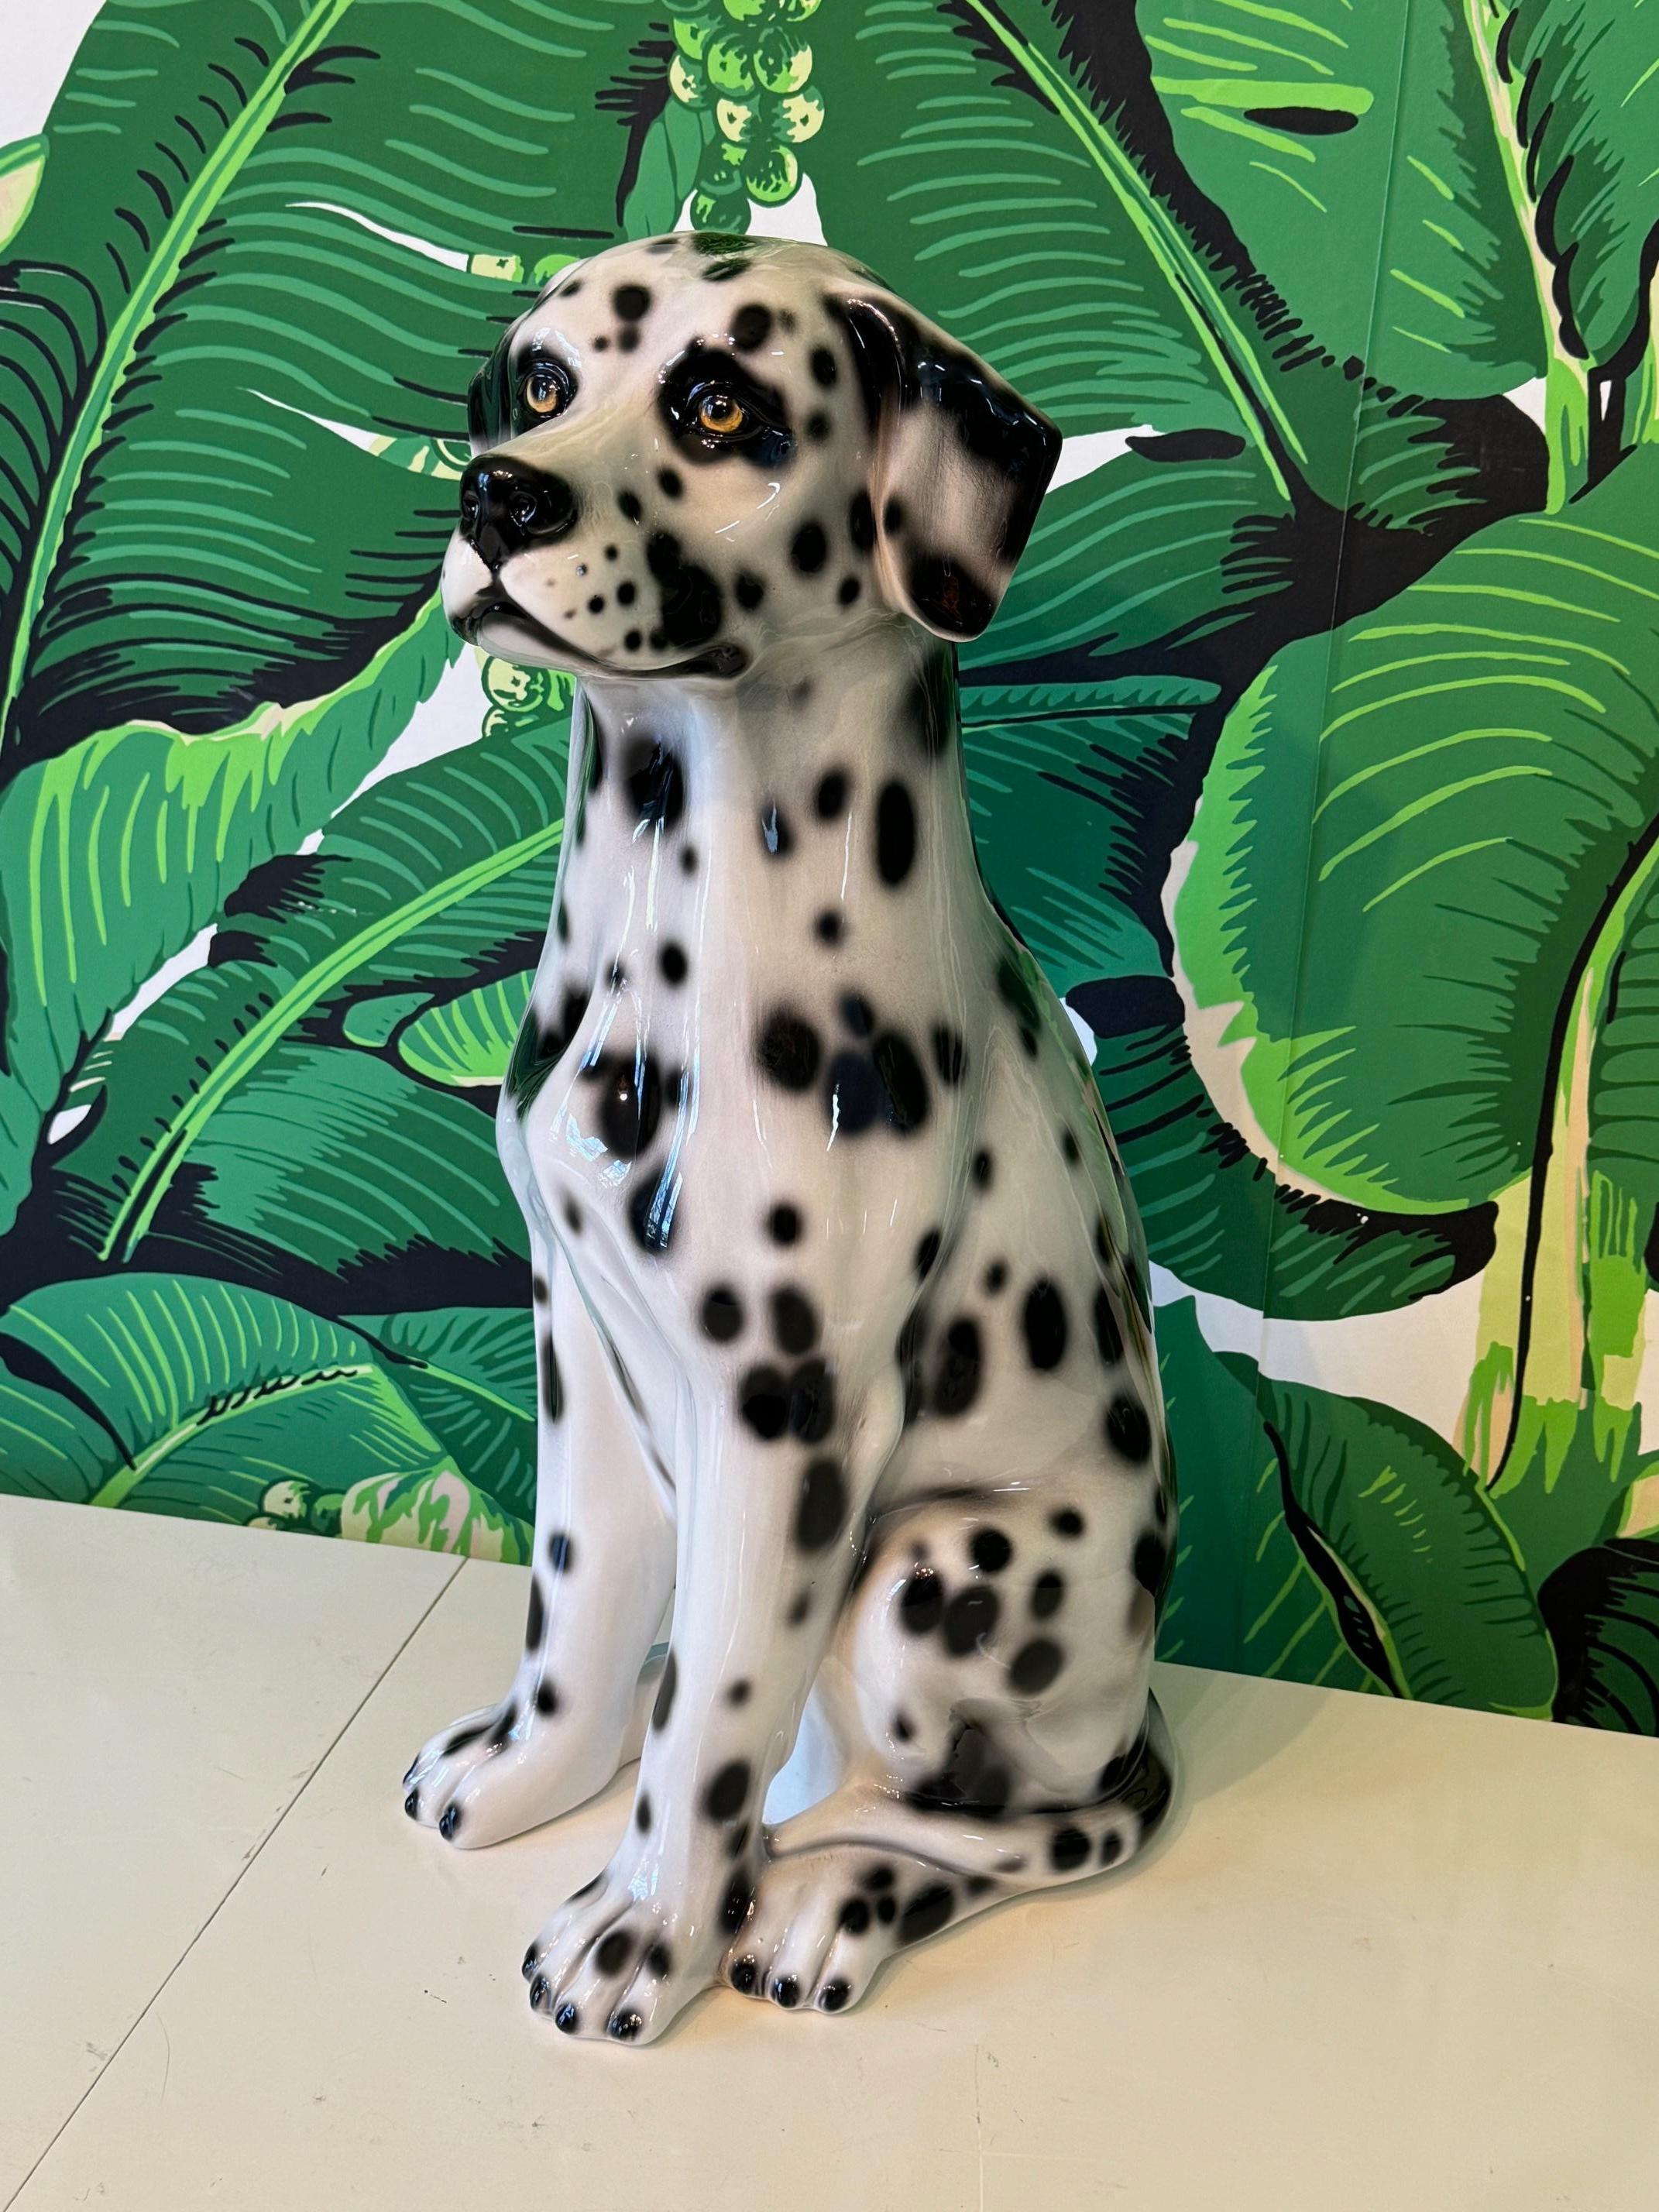 Large ceramic dog statue features life-like hand painted detailing and a high gloss finish. Very good condition with no chips or cracks.
For a shipping quote to your exact zip code, please message us.
